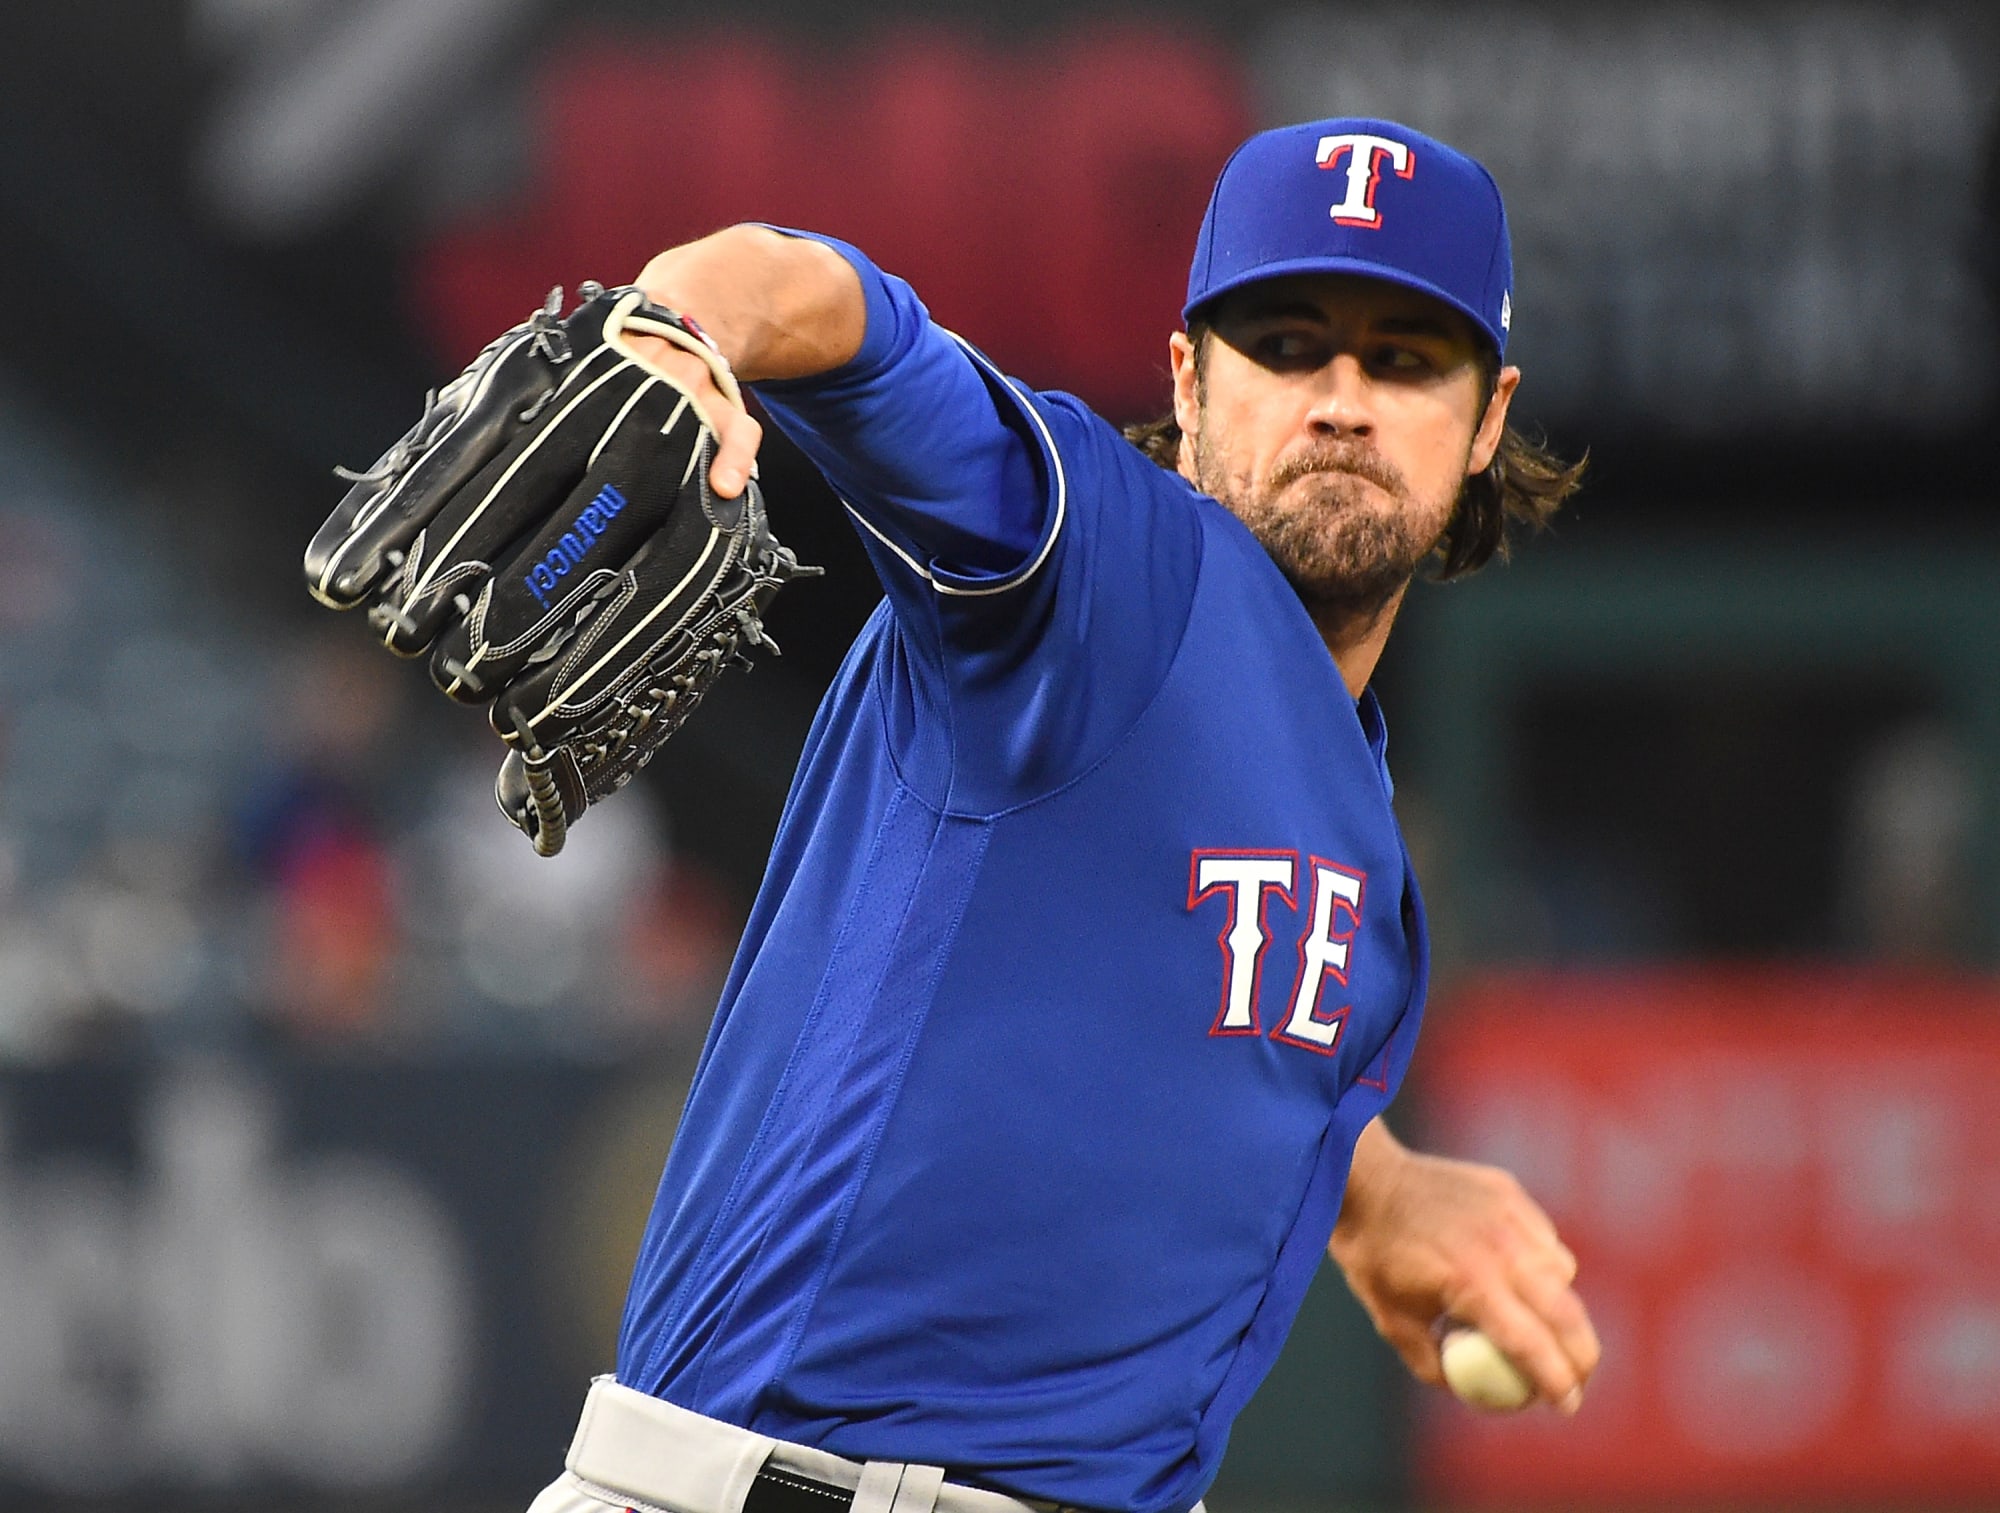 Texas Rangers Is Cole Hamels Still Considered An Ace Pitcher?